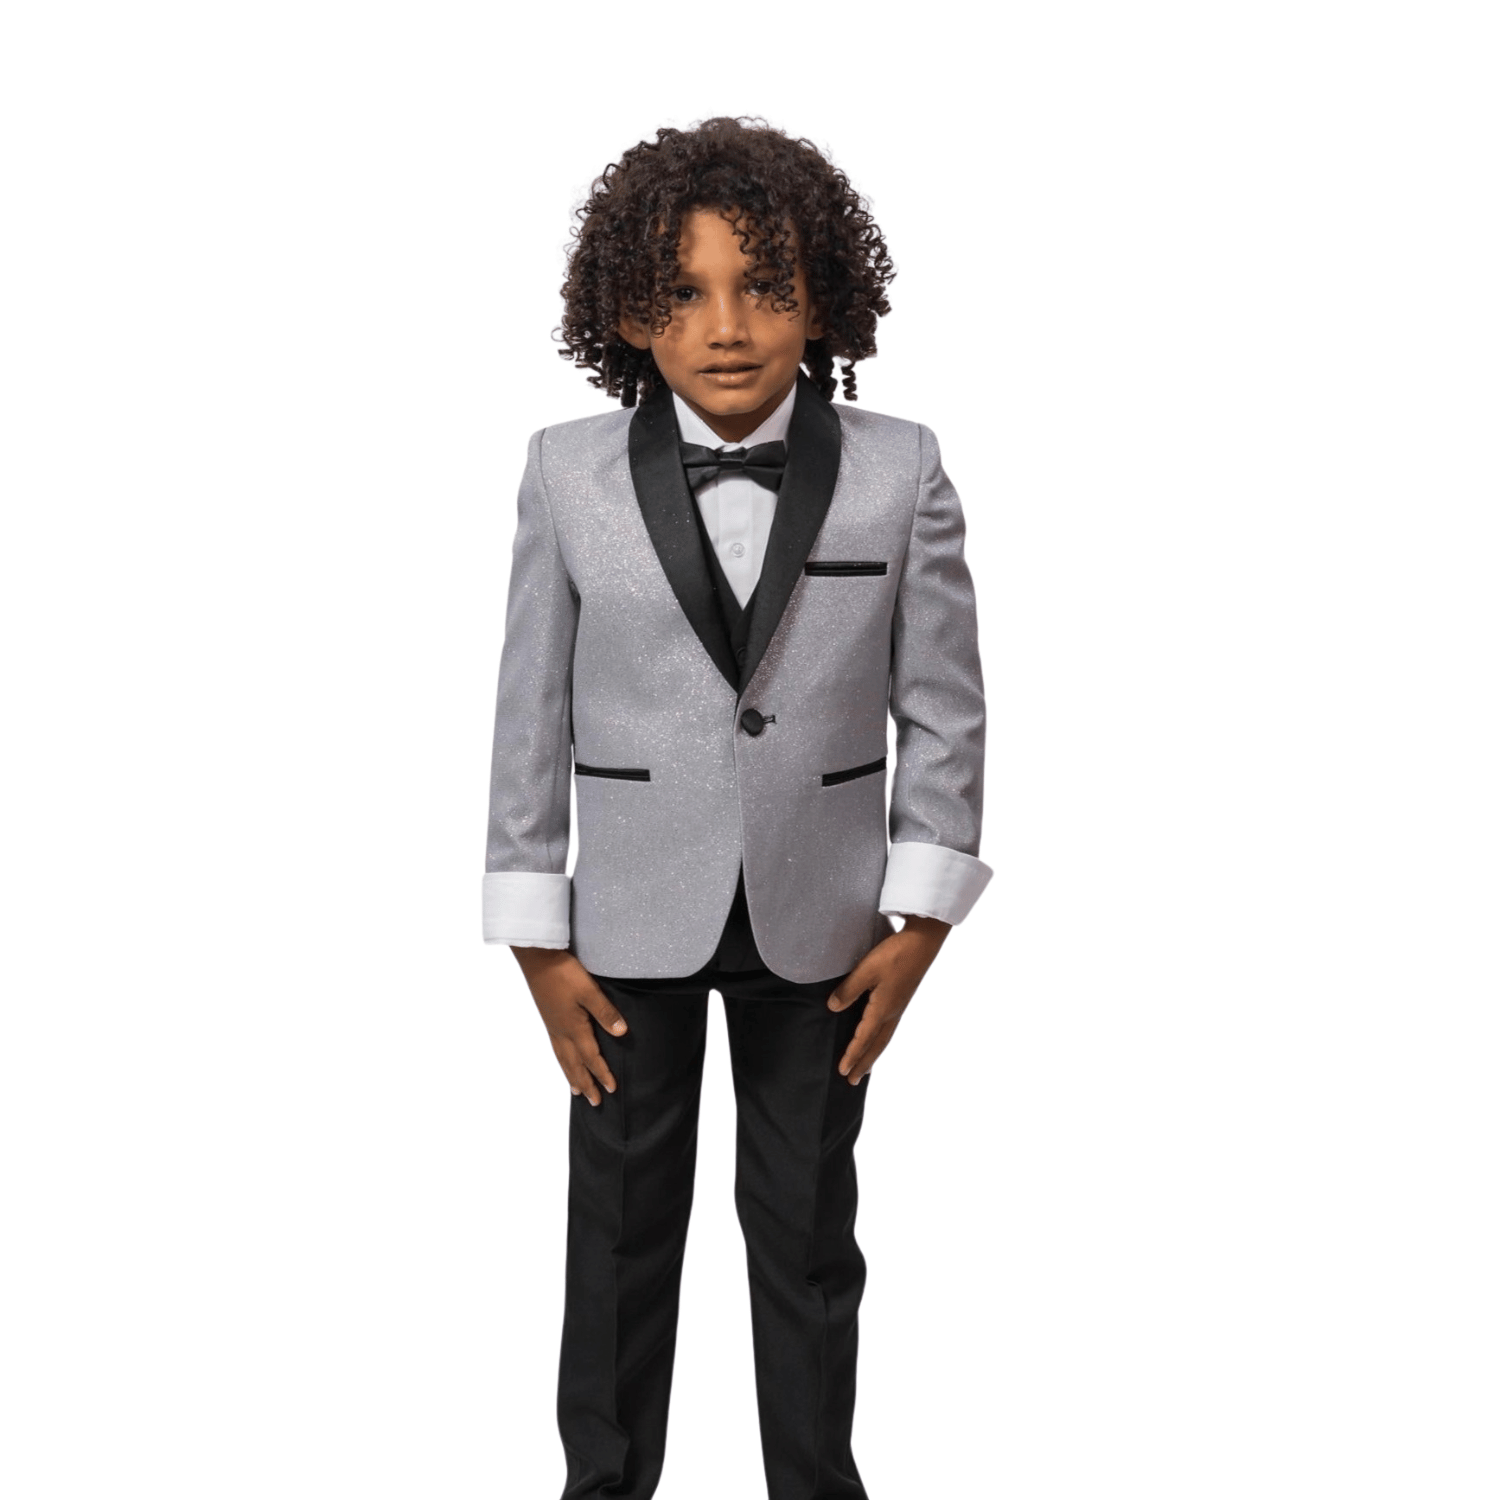 The Host Formal Boys Suit